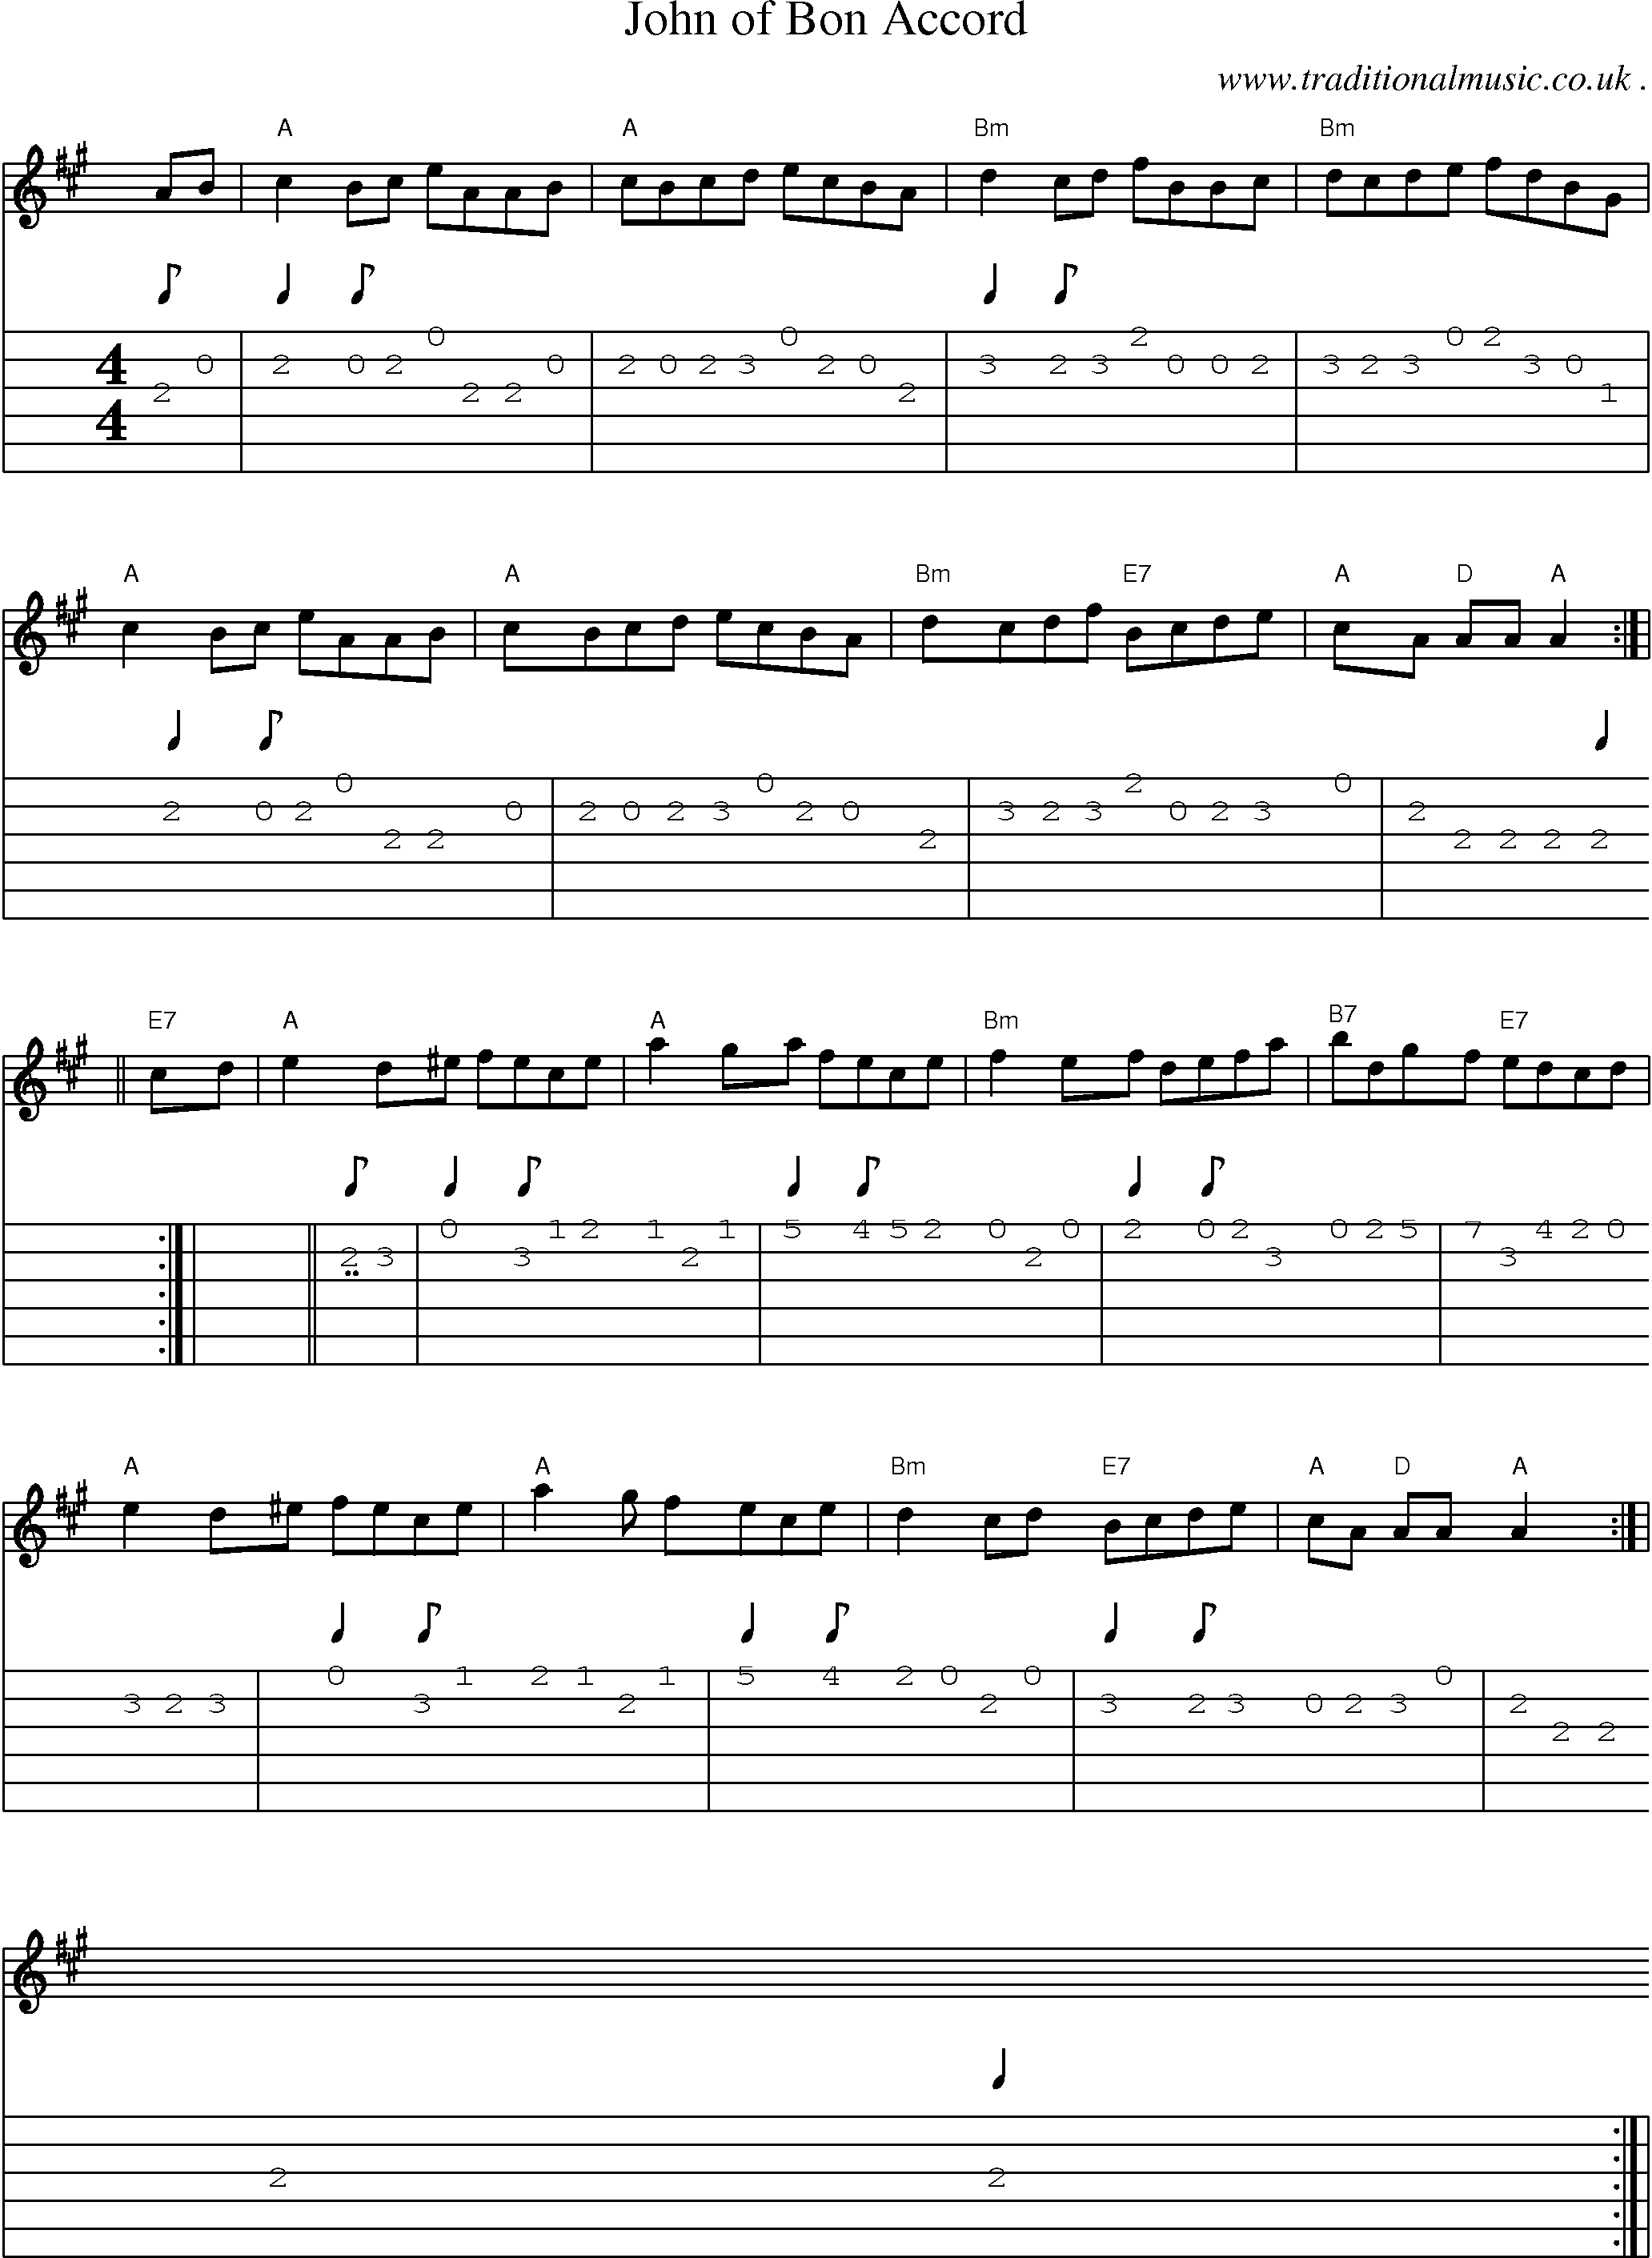 Sheet-music  score, Chords and Guitar Tabs for John Of Bon Accord